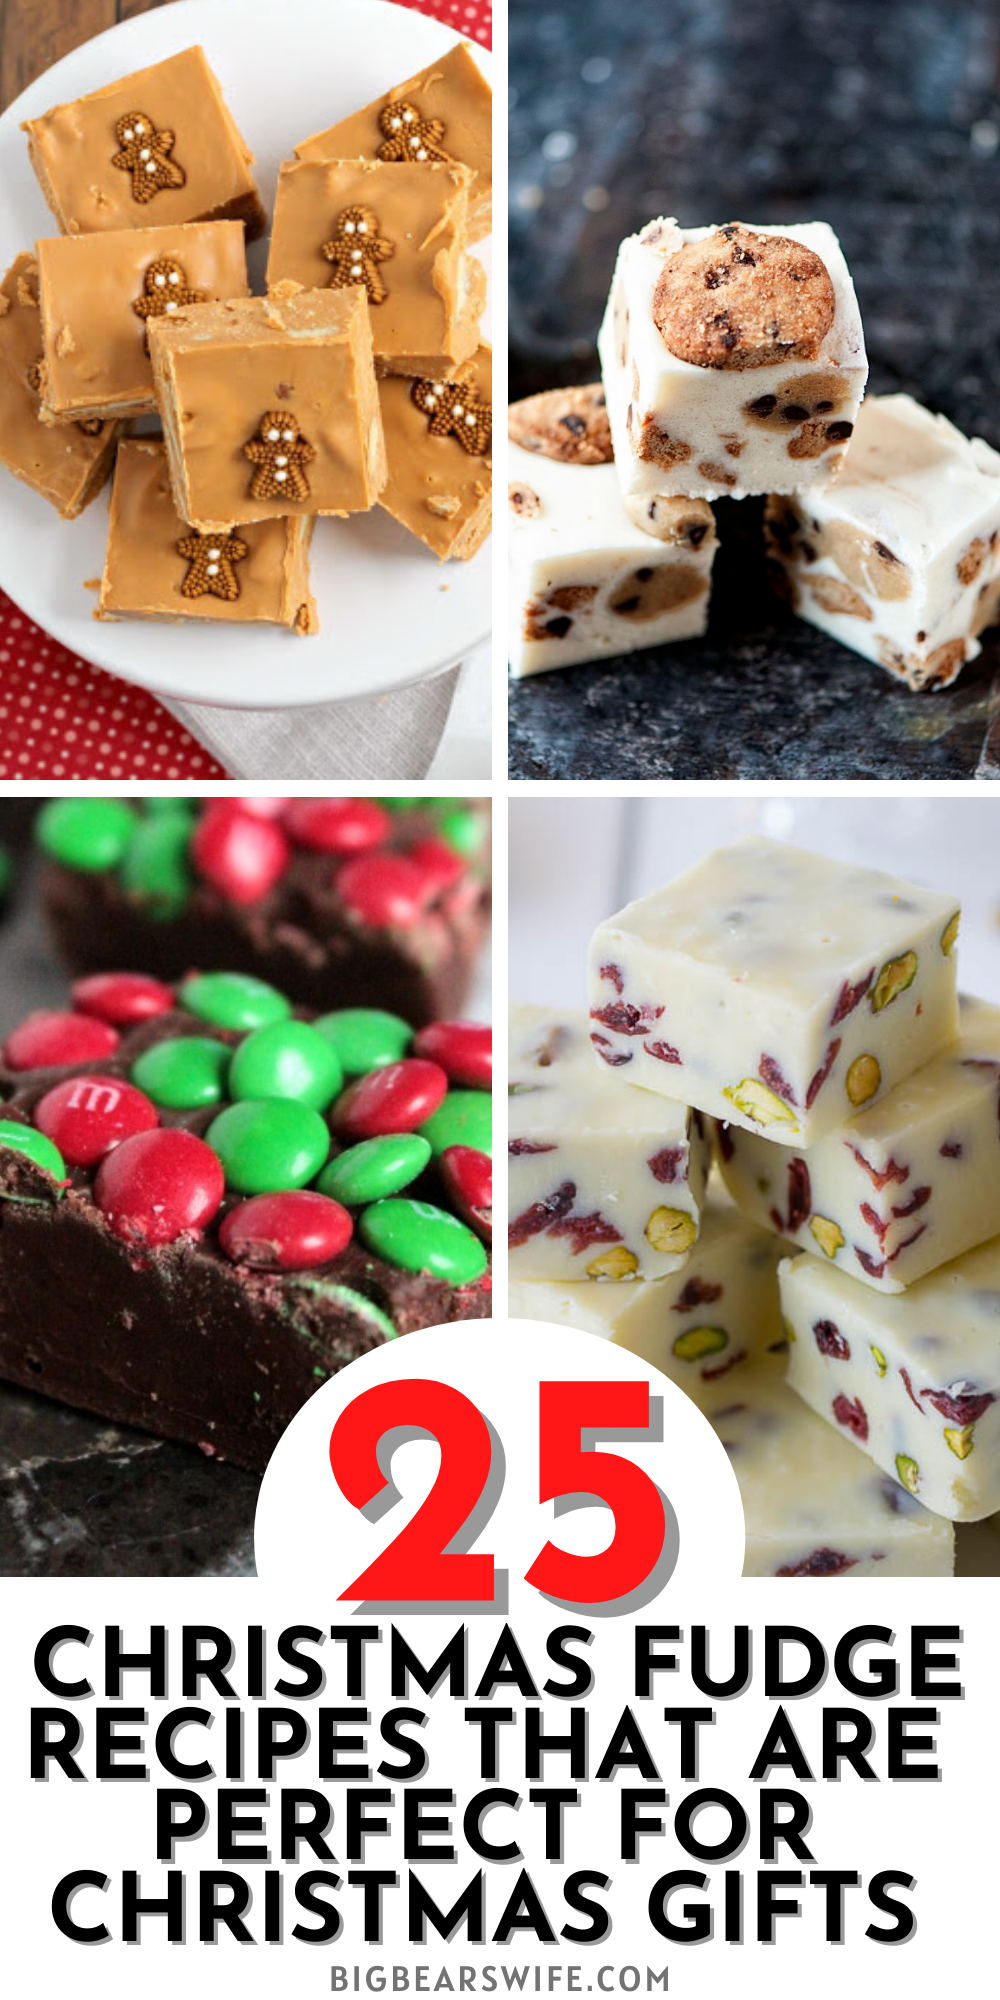 25 Christmas Fudge Recipes that are perfect for Christmas Gifts - Homemade gifts from the kitchen are always some of the best gifts that you can give or receive at Christmas! This list has 25 Christmas Fudge Recipes that are perfect for Christmas Gifts or hostess gifts! via @bigbearswife